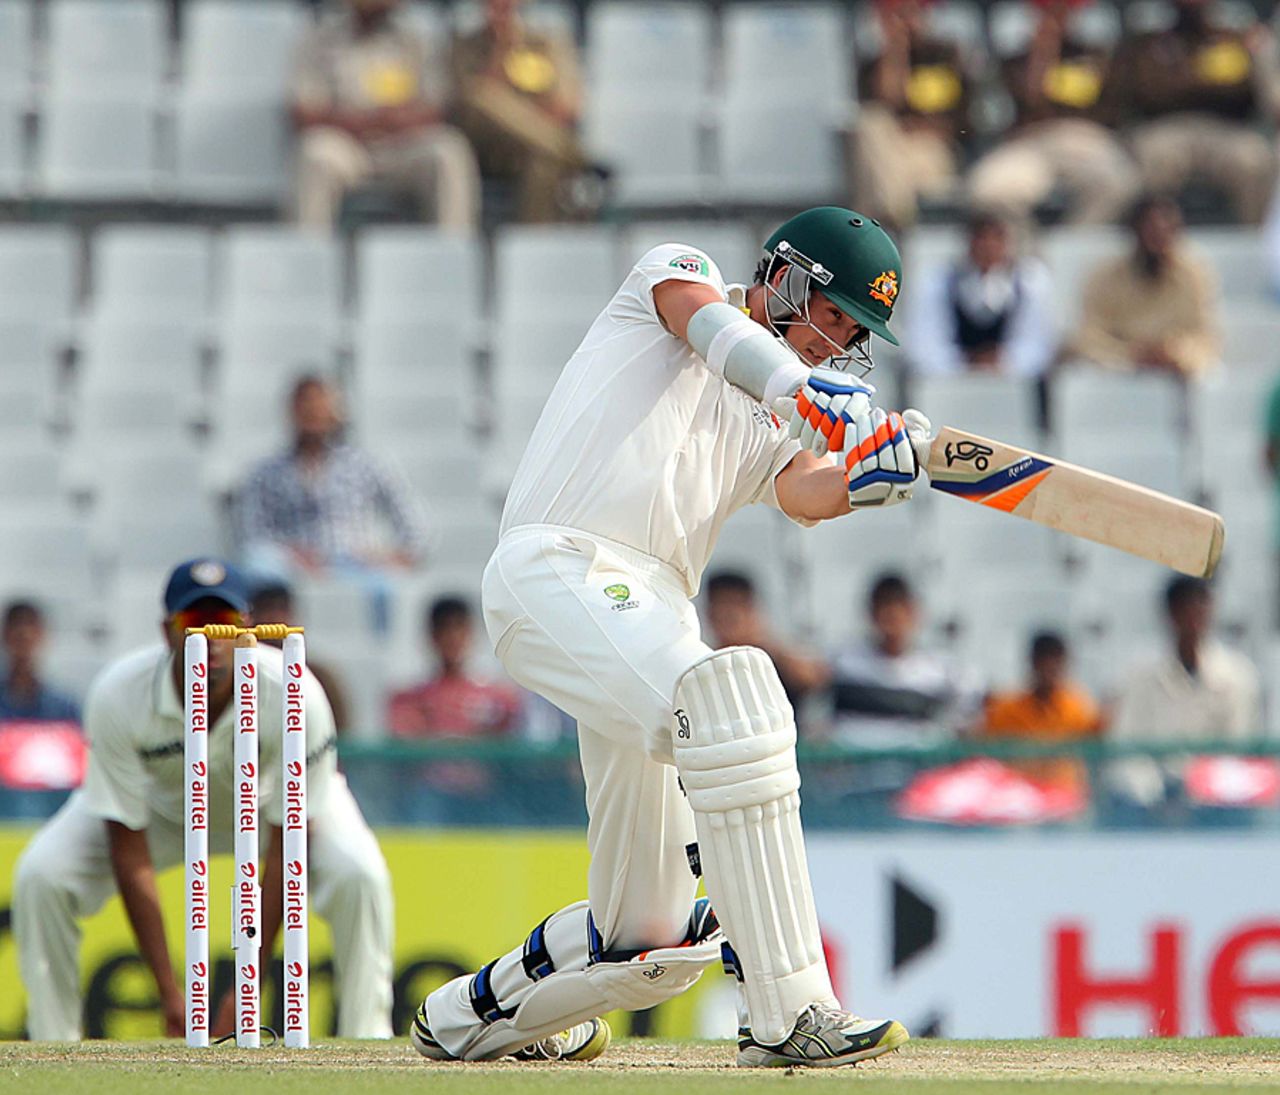 Mitchell Starc attempts an aggressive shot, India v Australia, 3rd Test, Mohali, 3rd day, March 16, 2013